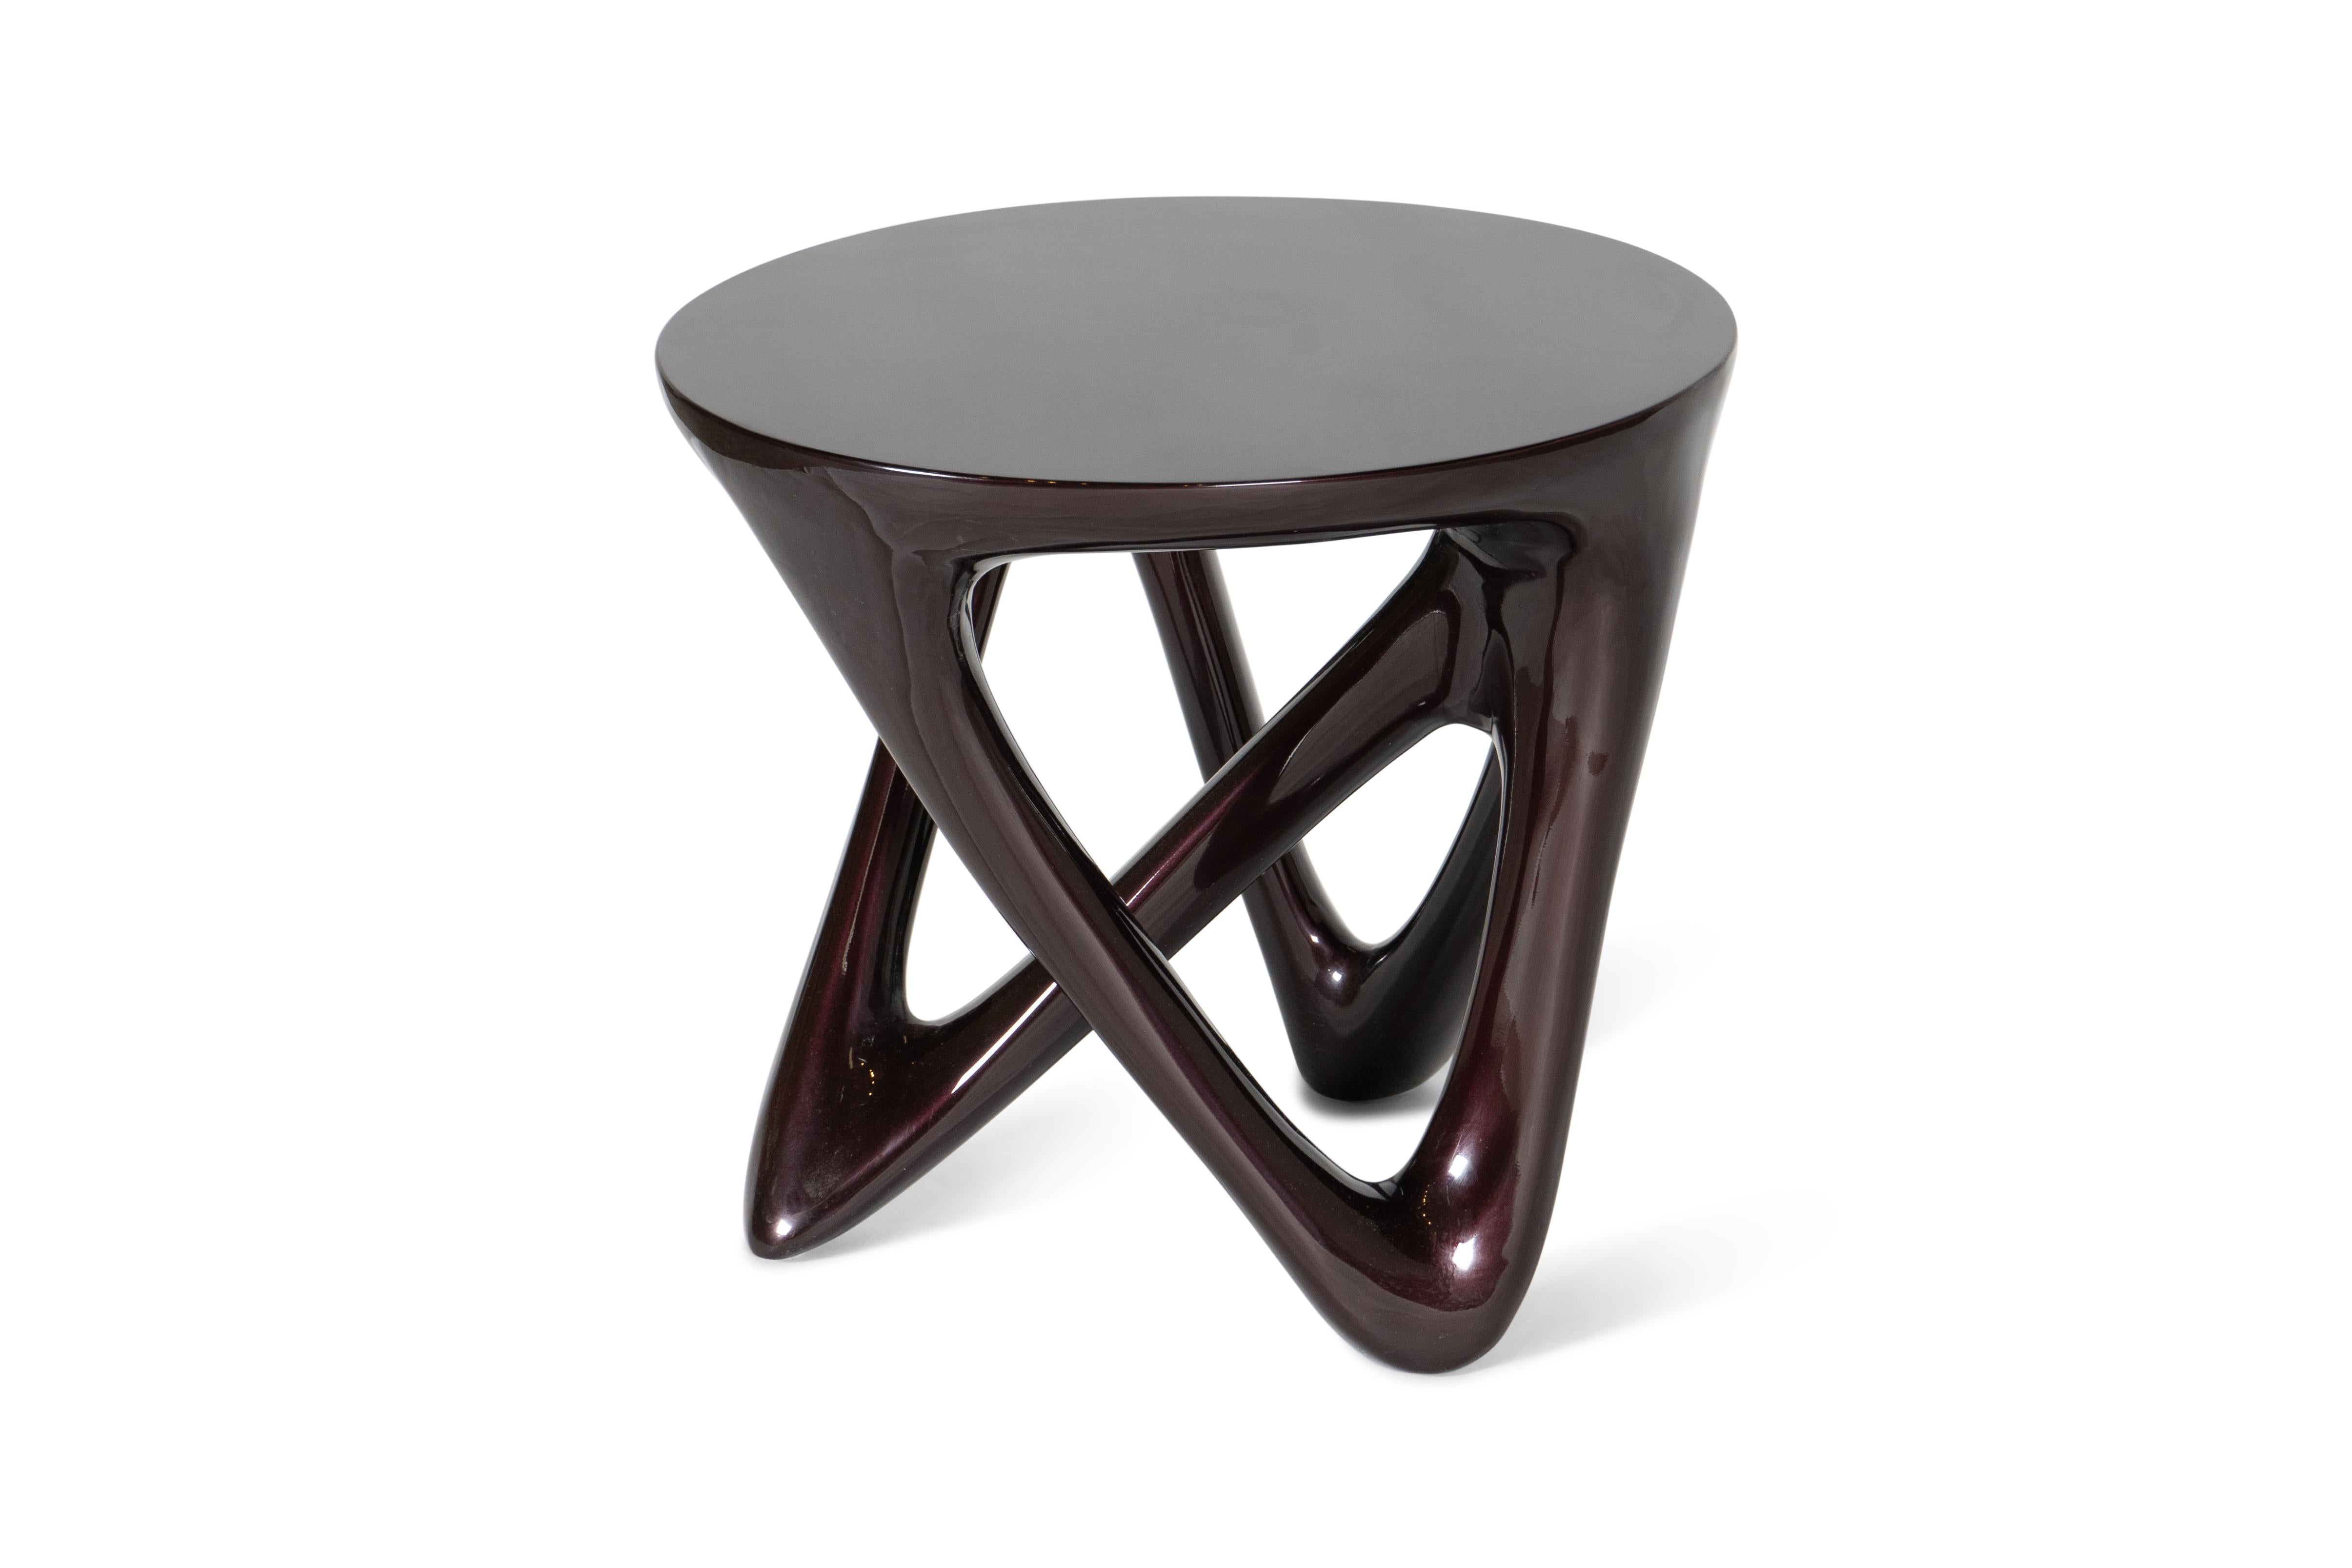 Painted Amorph Ya Modern Side Table in Metallic lacquer For Sale